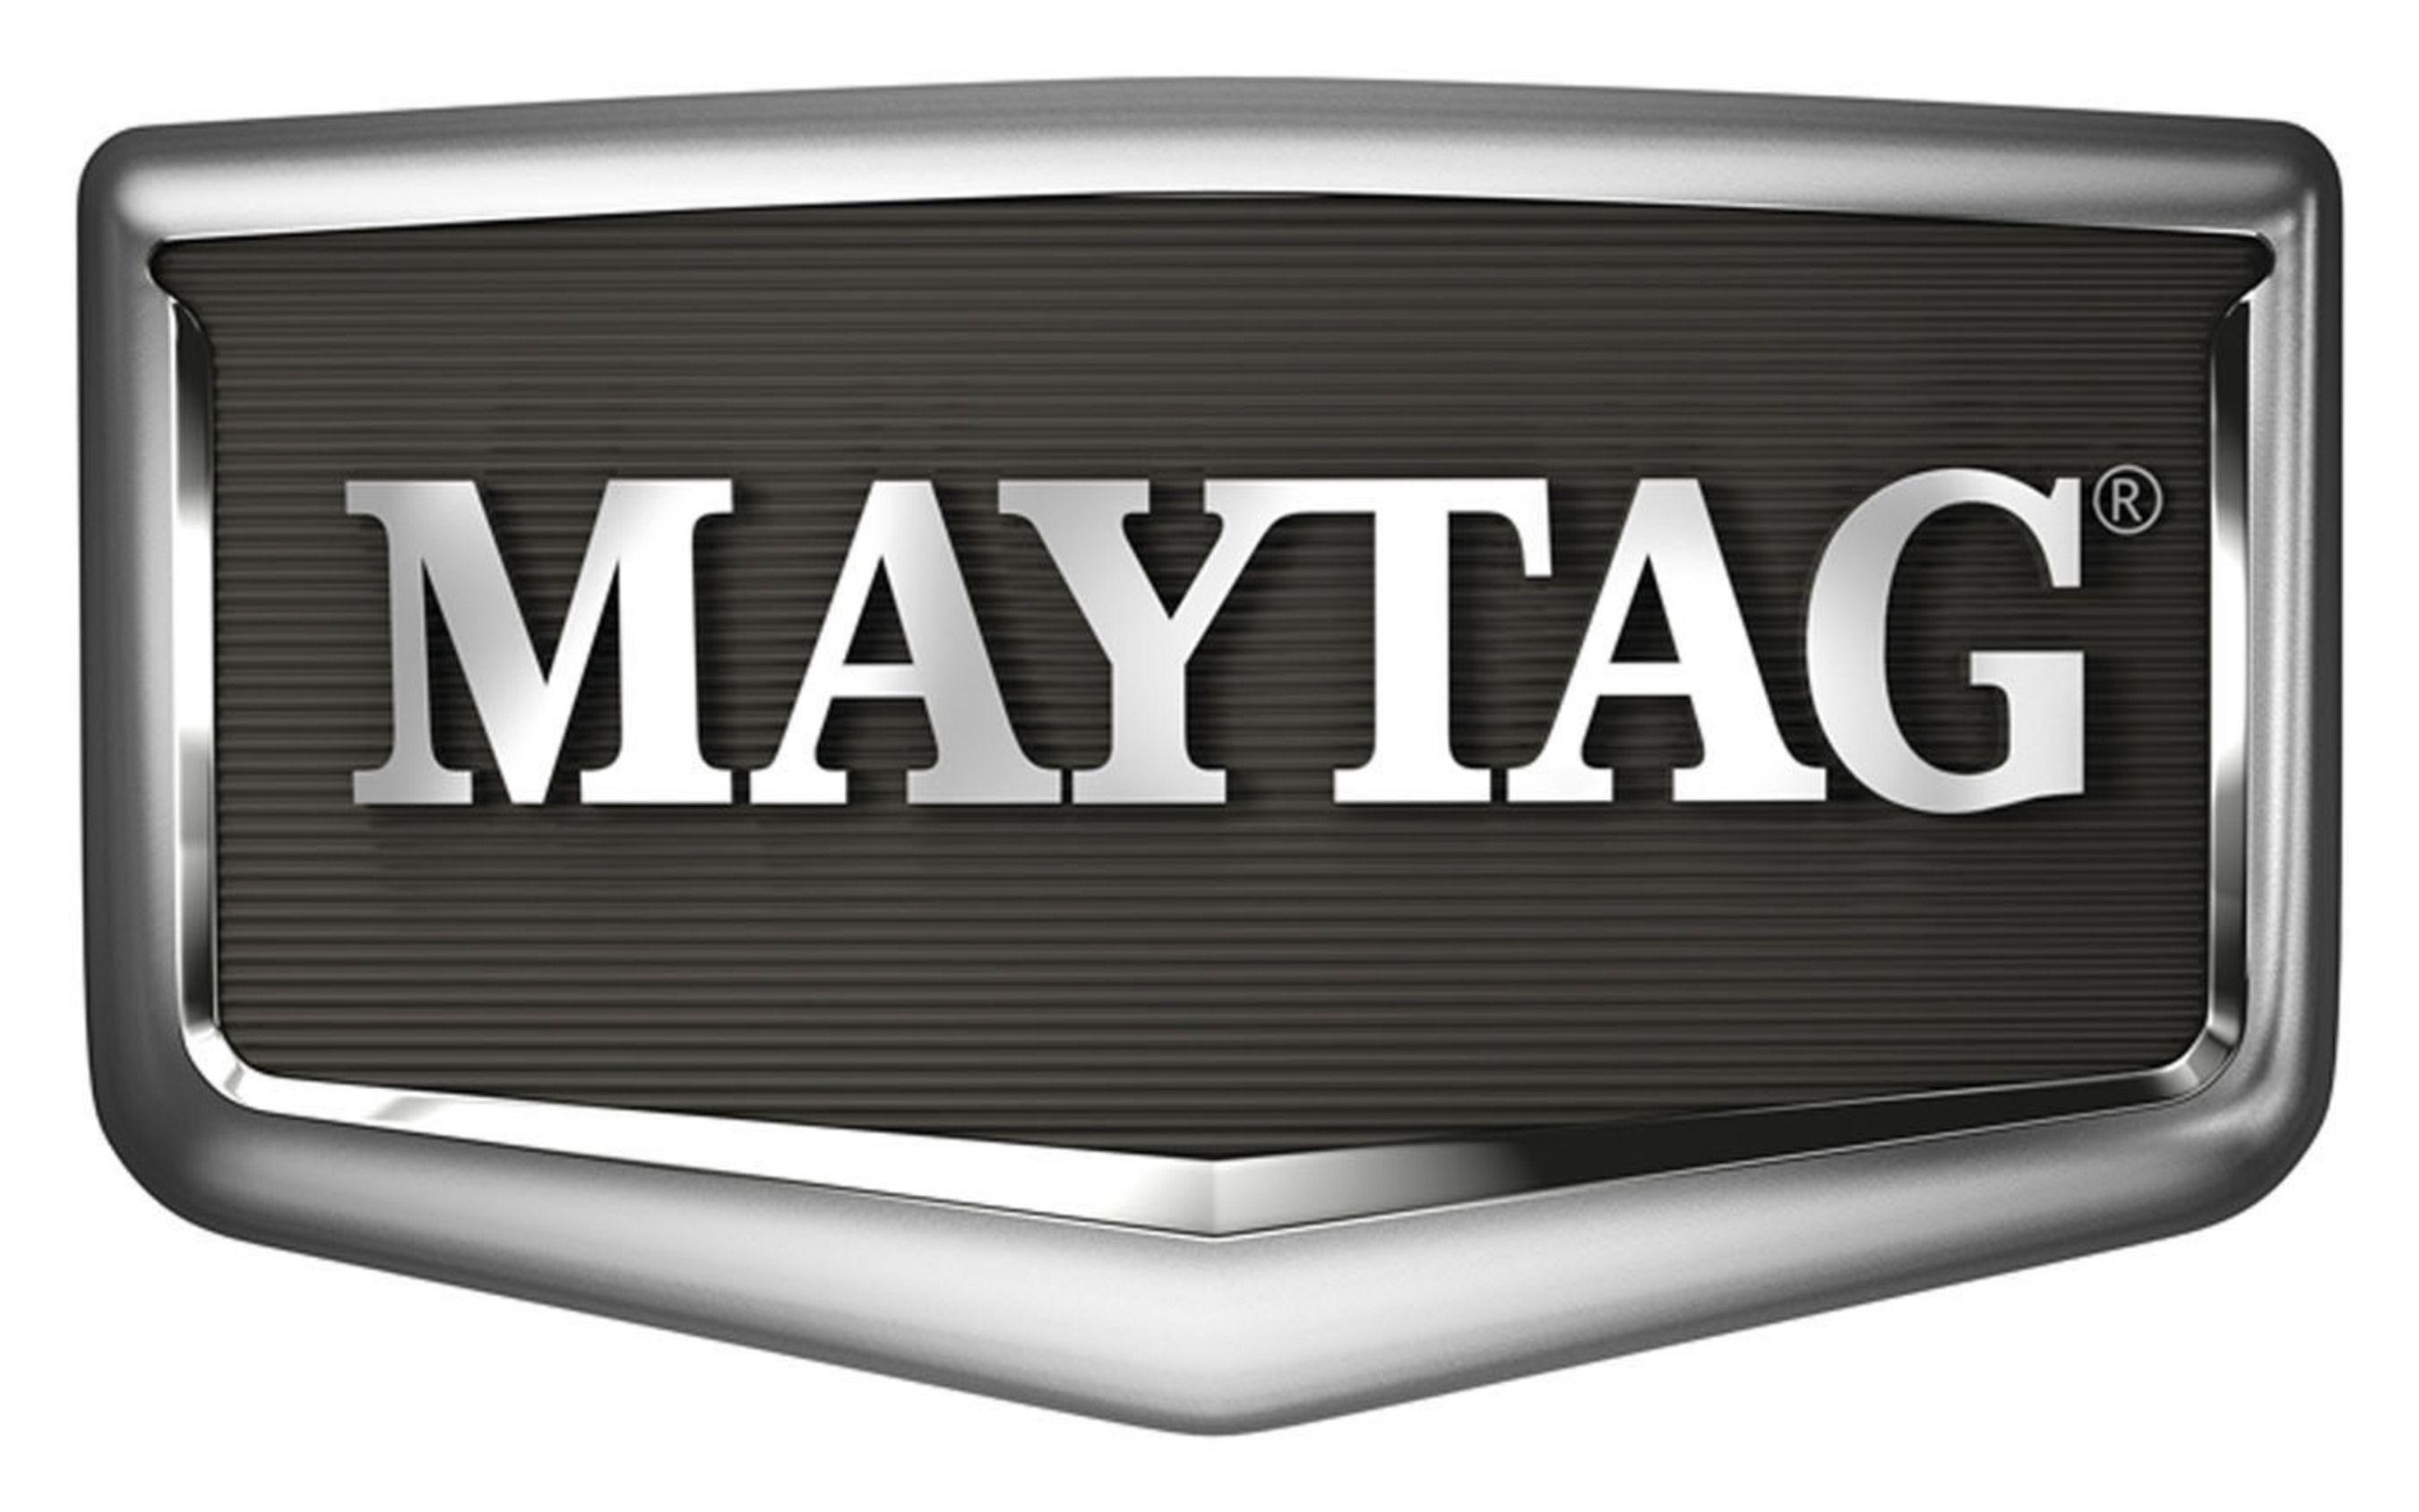 Maytag Refrigeration Logo - New Maytag® Refrigerator Built with Bold Style That's Made to Last